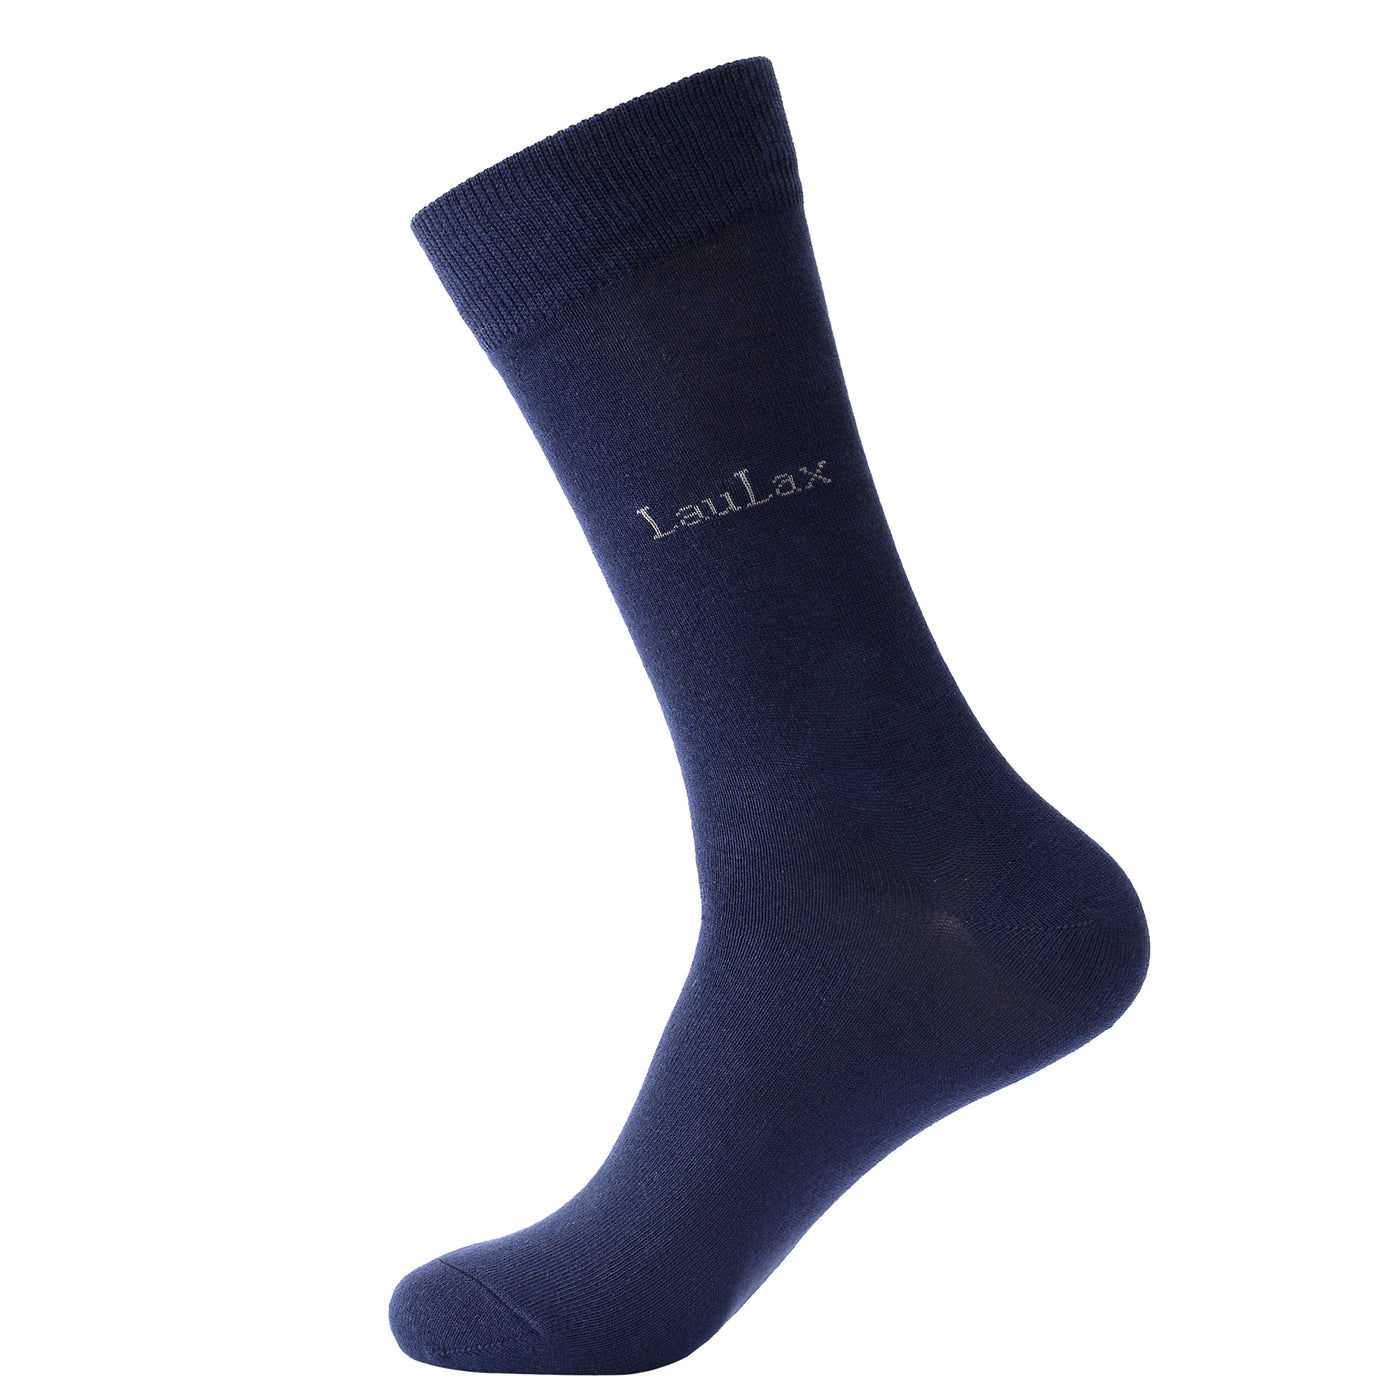 Laulax 4 Pairs High Quality Finest Combed Cotton Dress Socks, Navy, Gift Bag with socks wash bag